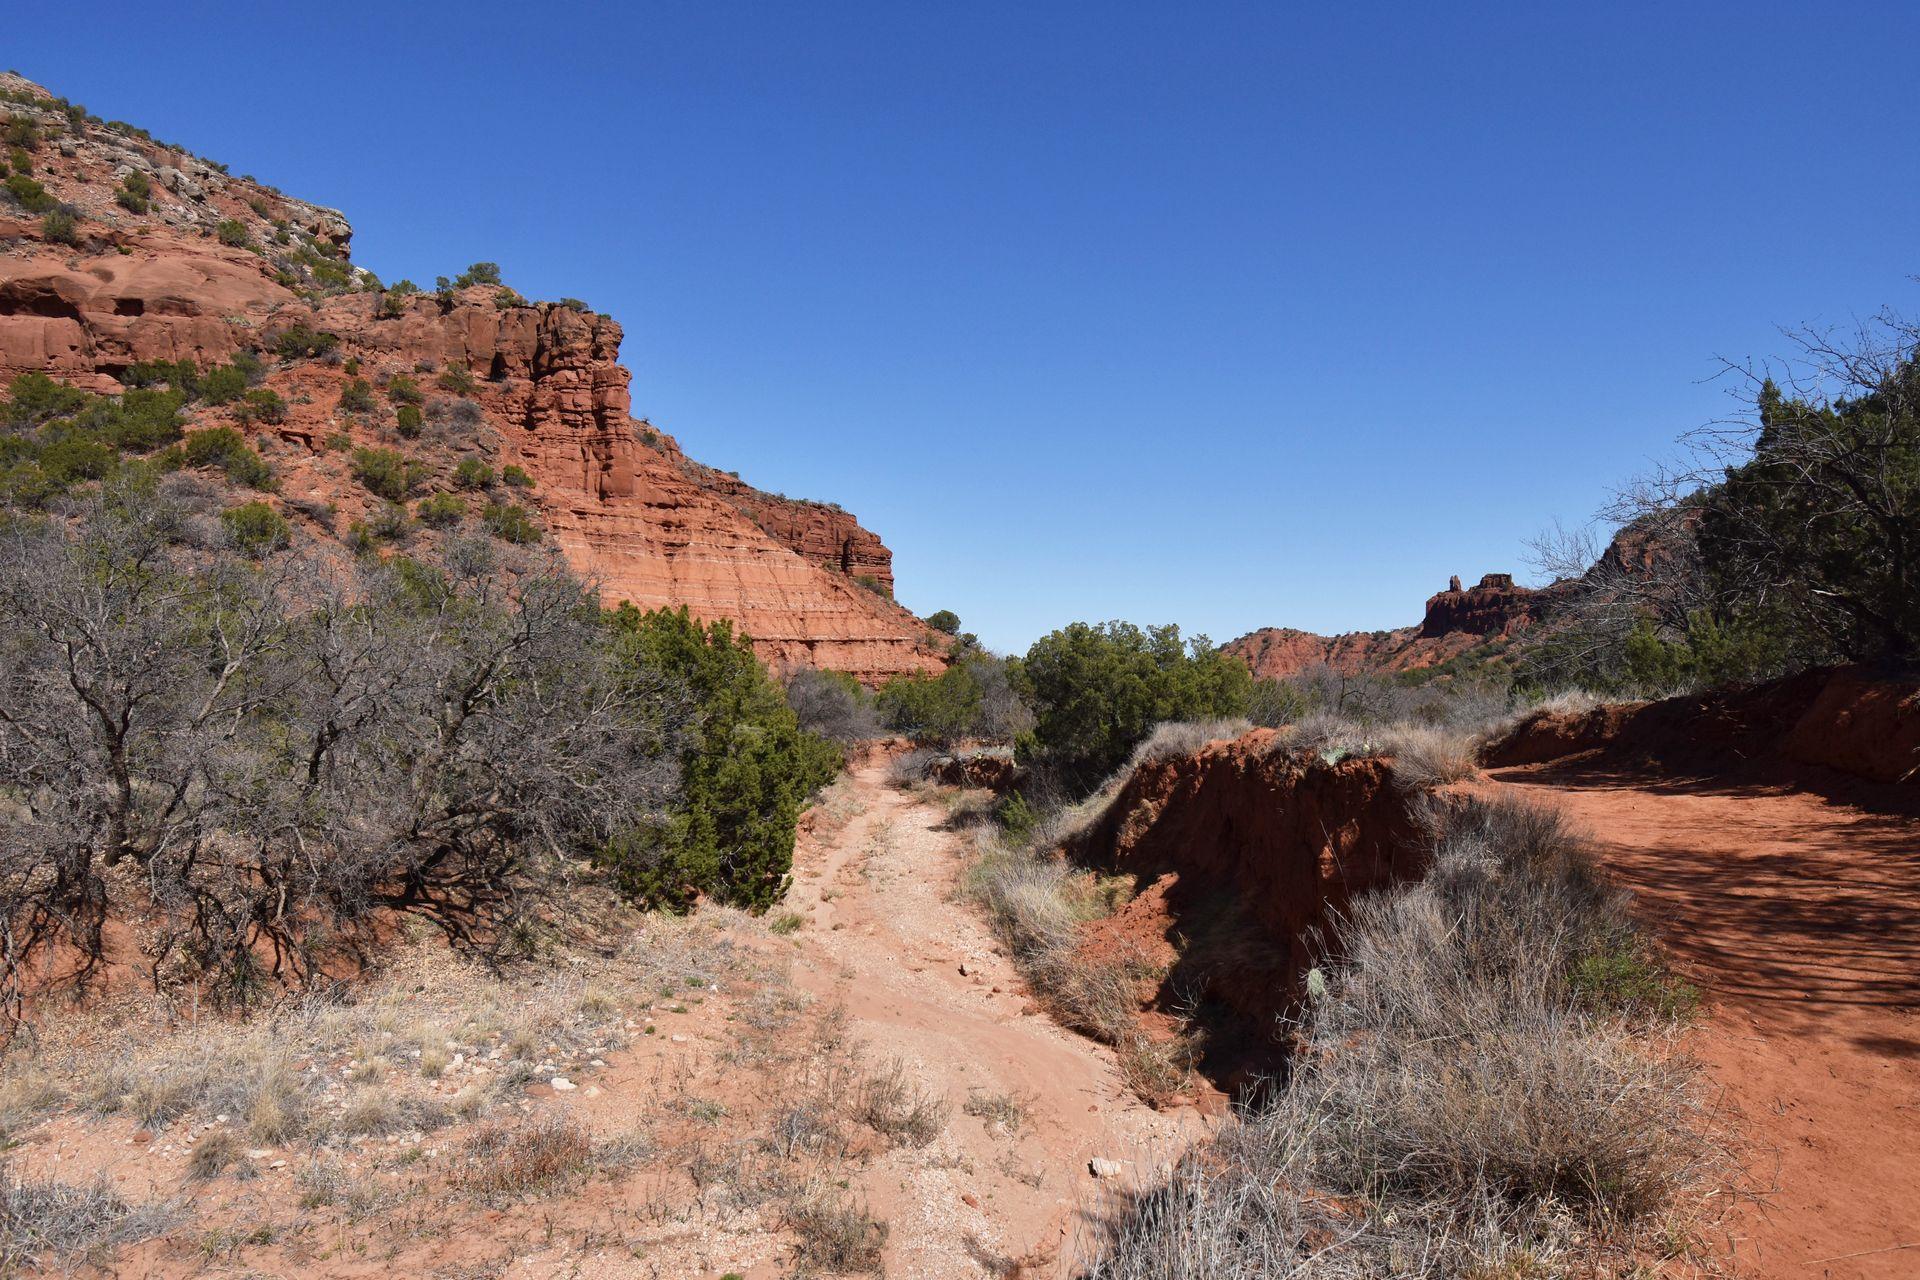 A view of orange rocks in the canyon while hiking in Caprock Canyons State Park.